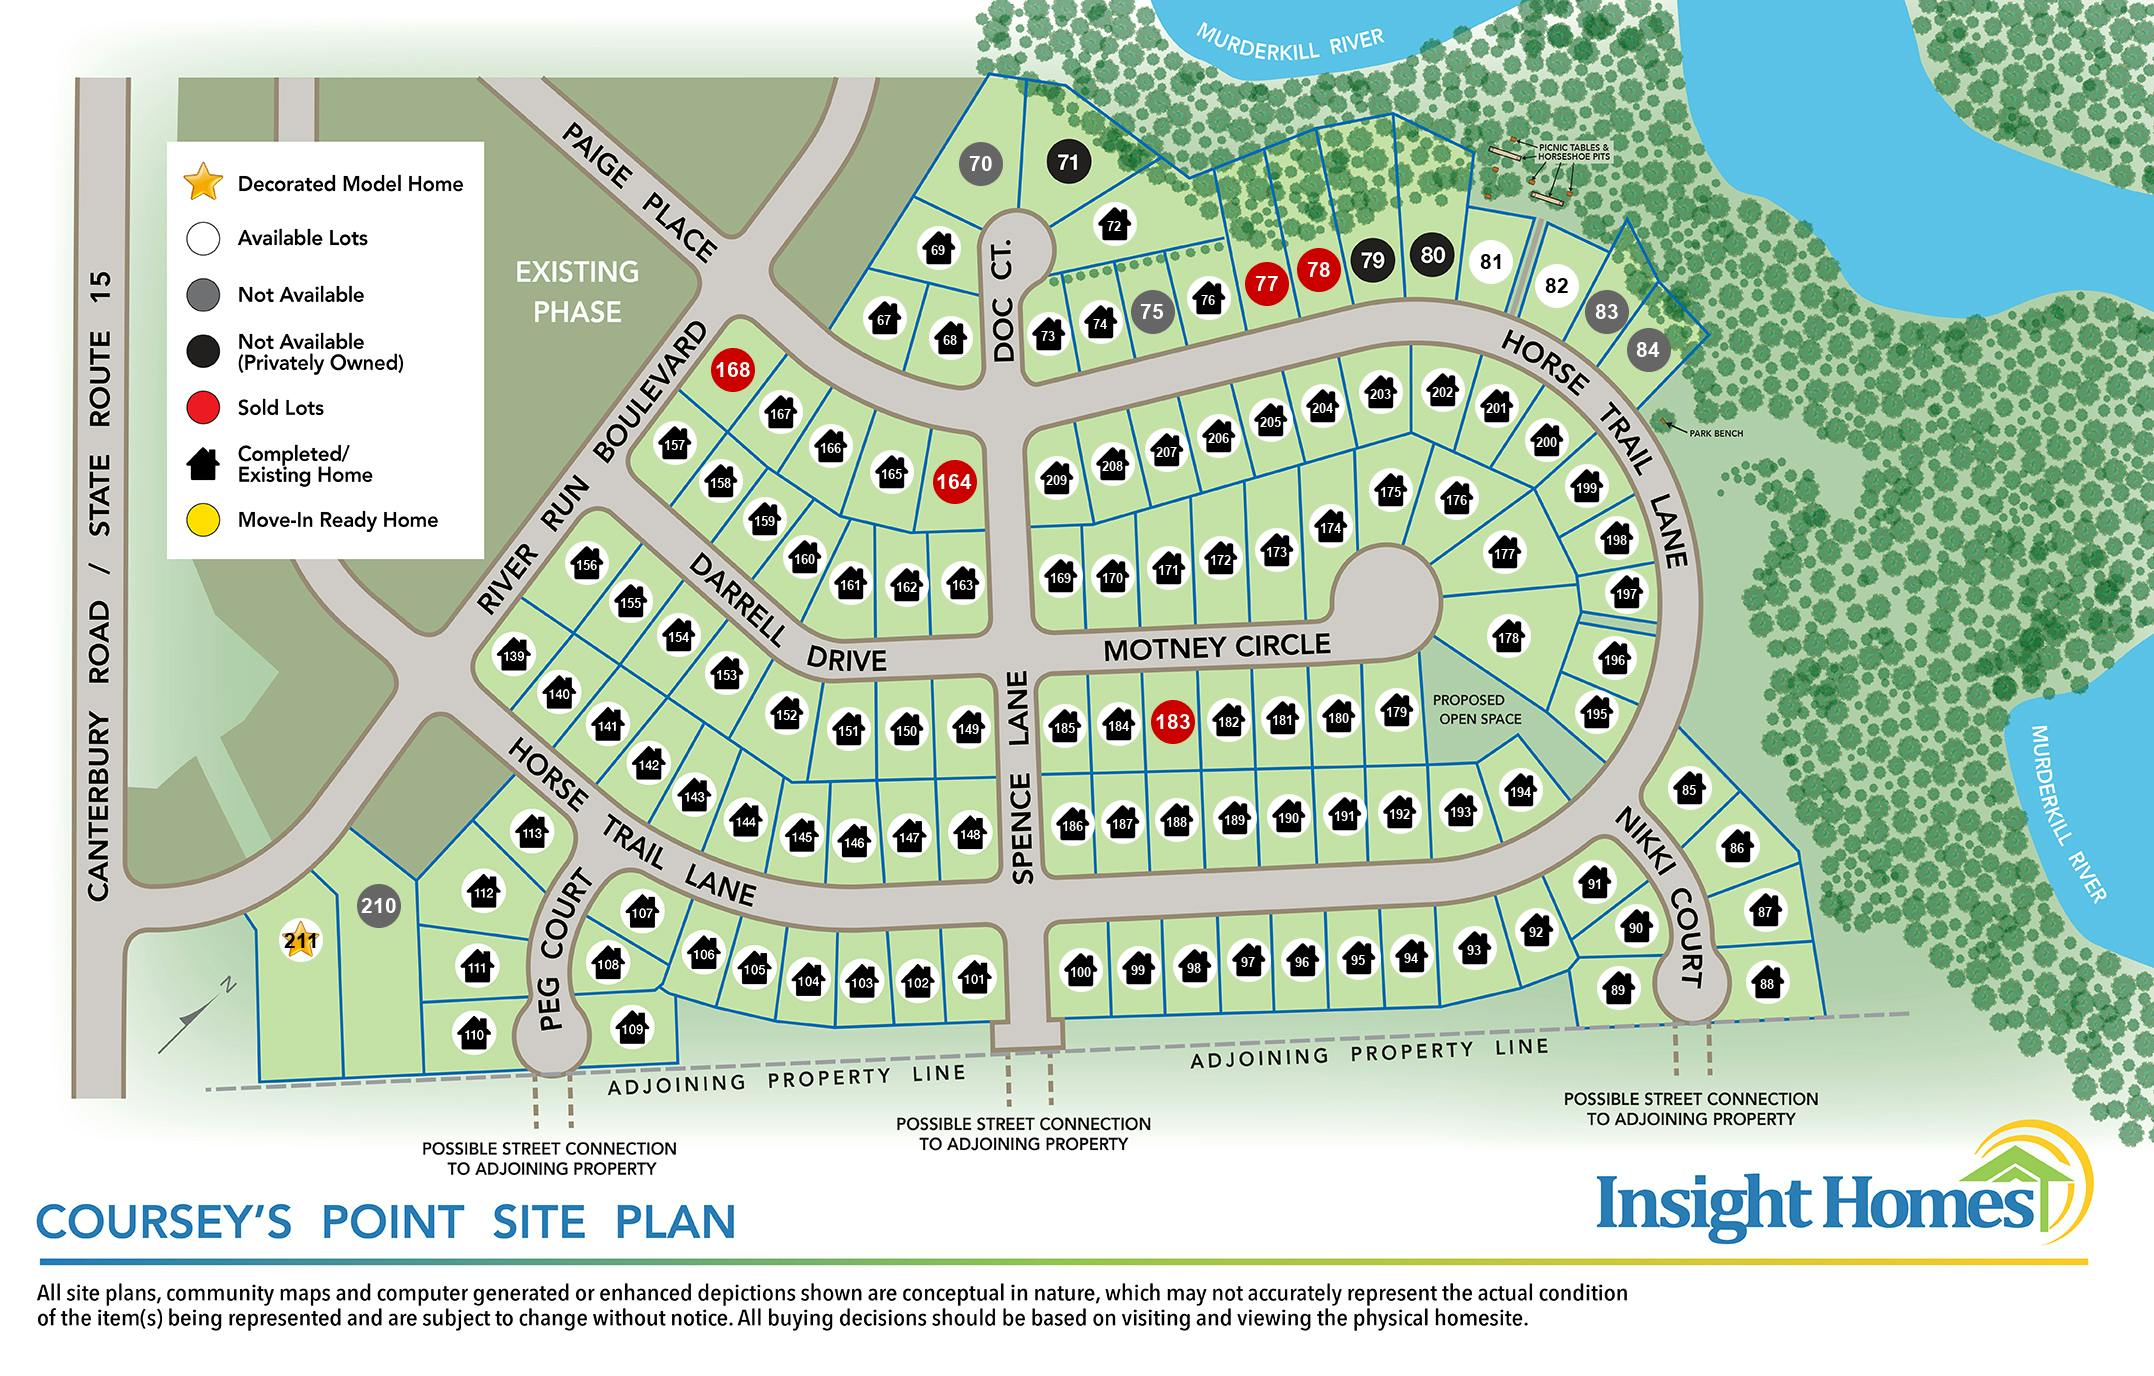 Coursey's Point Siteplan